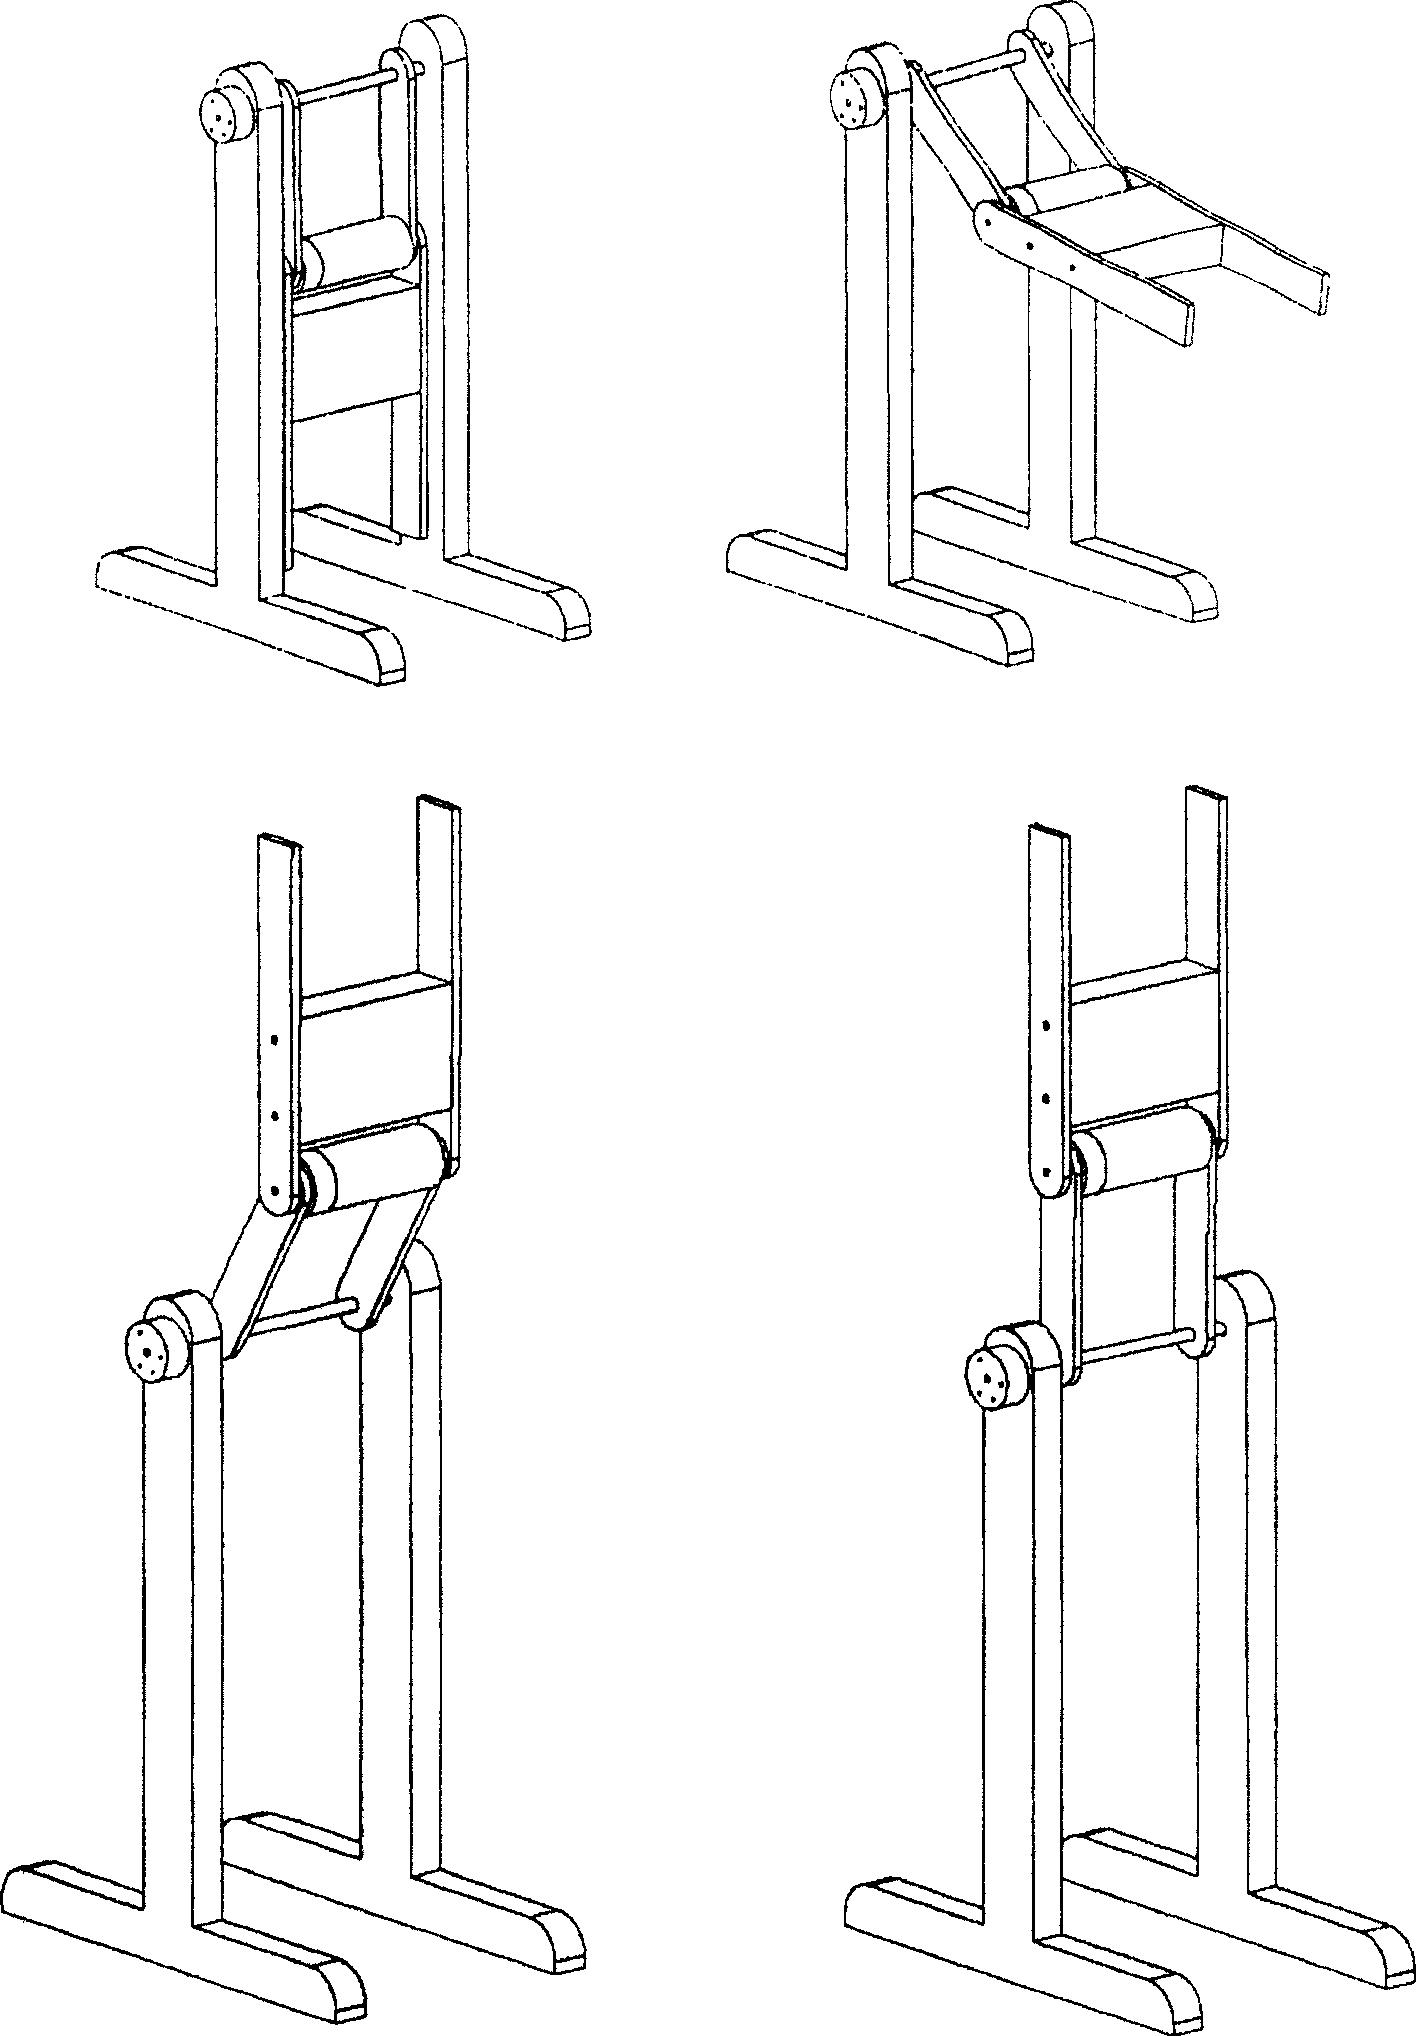 System and method of gymnastic robot